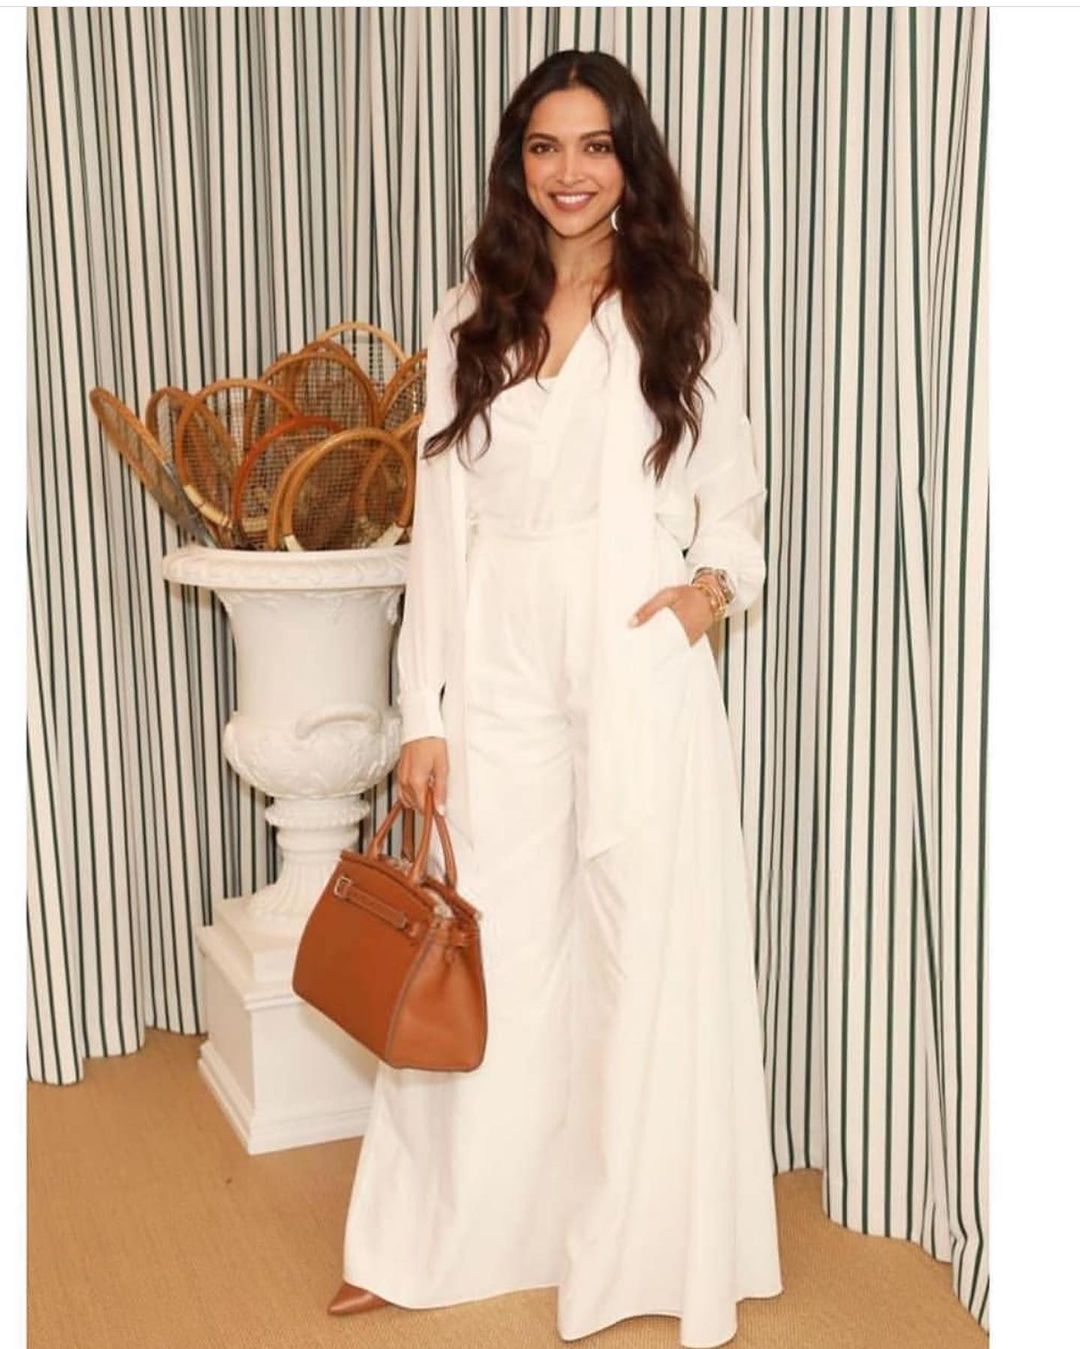 Deepika Padukone - Introducing #Coussin! The newest bag from the